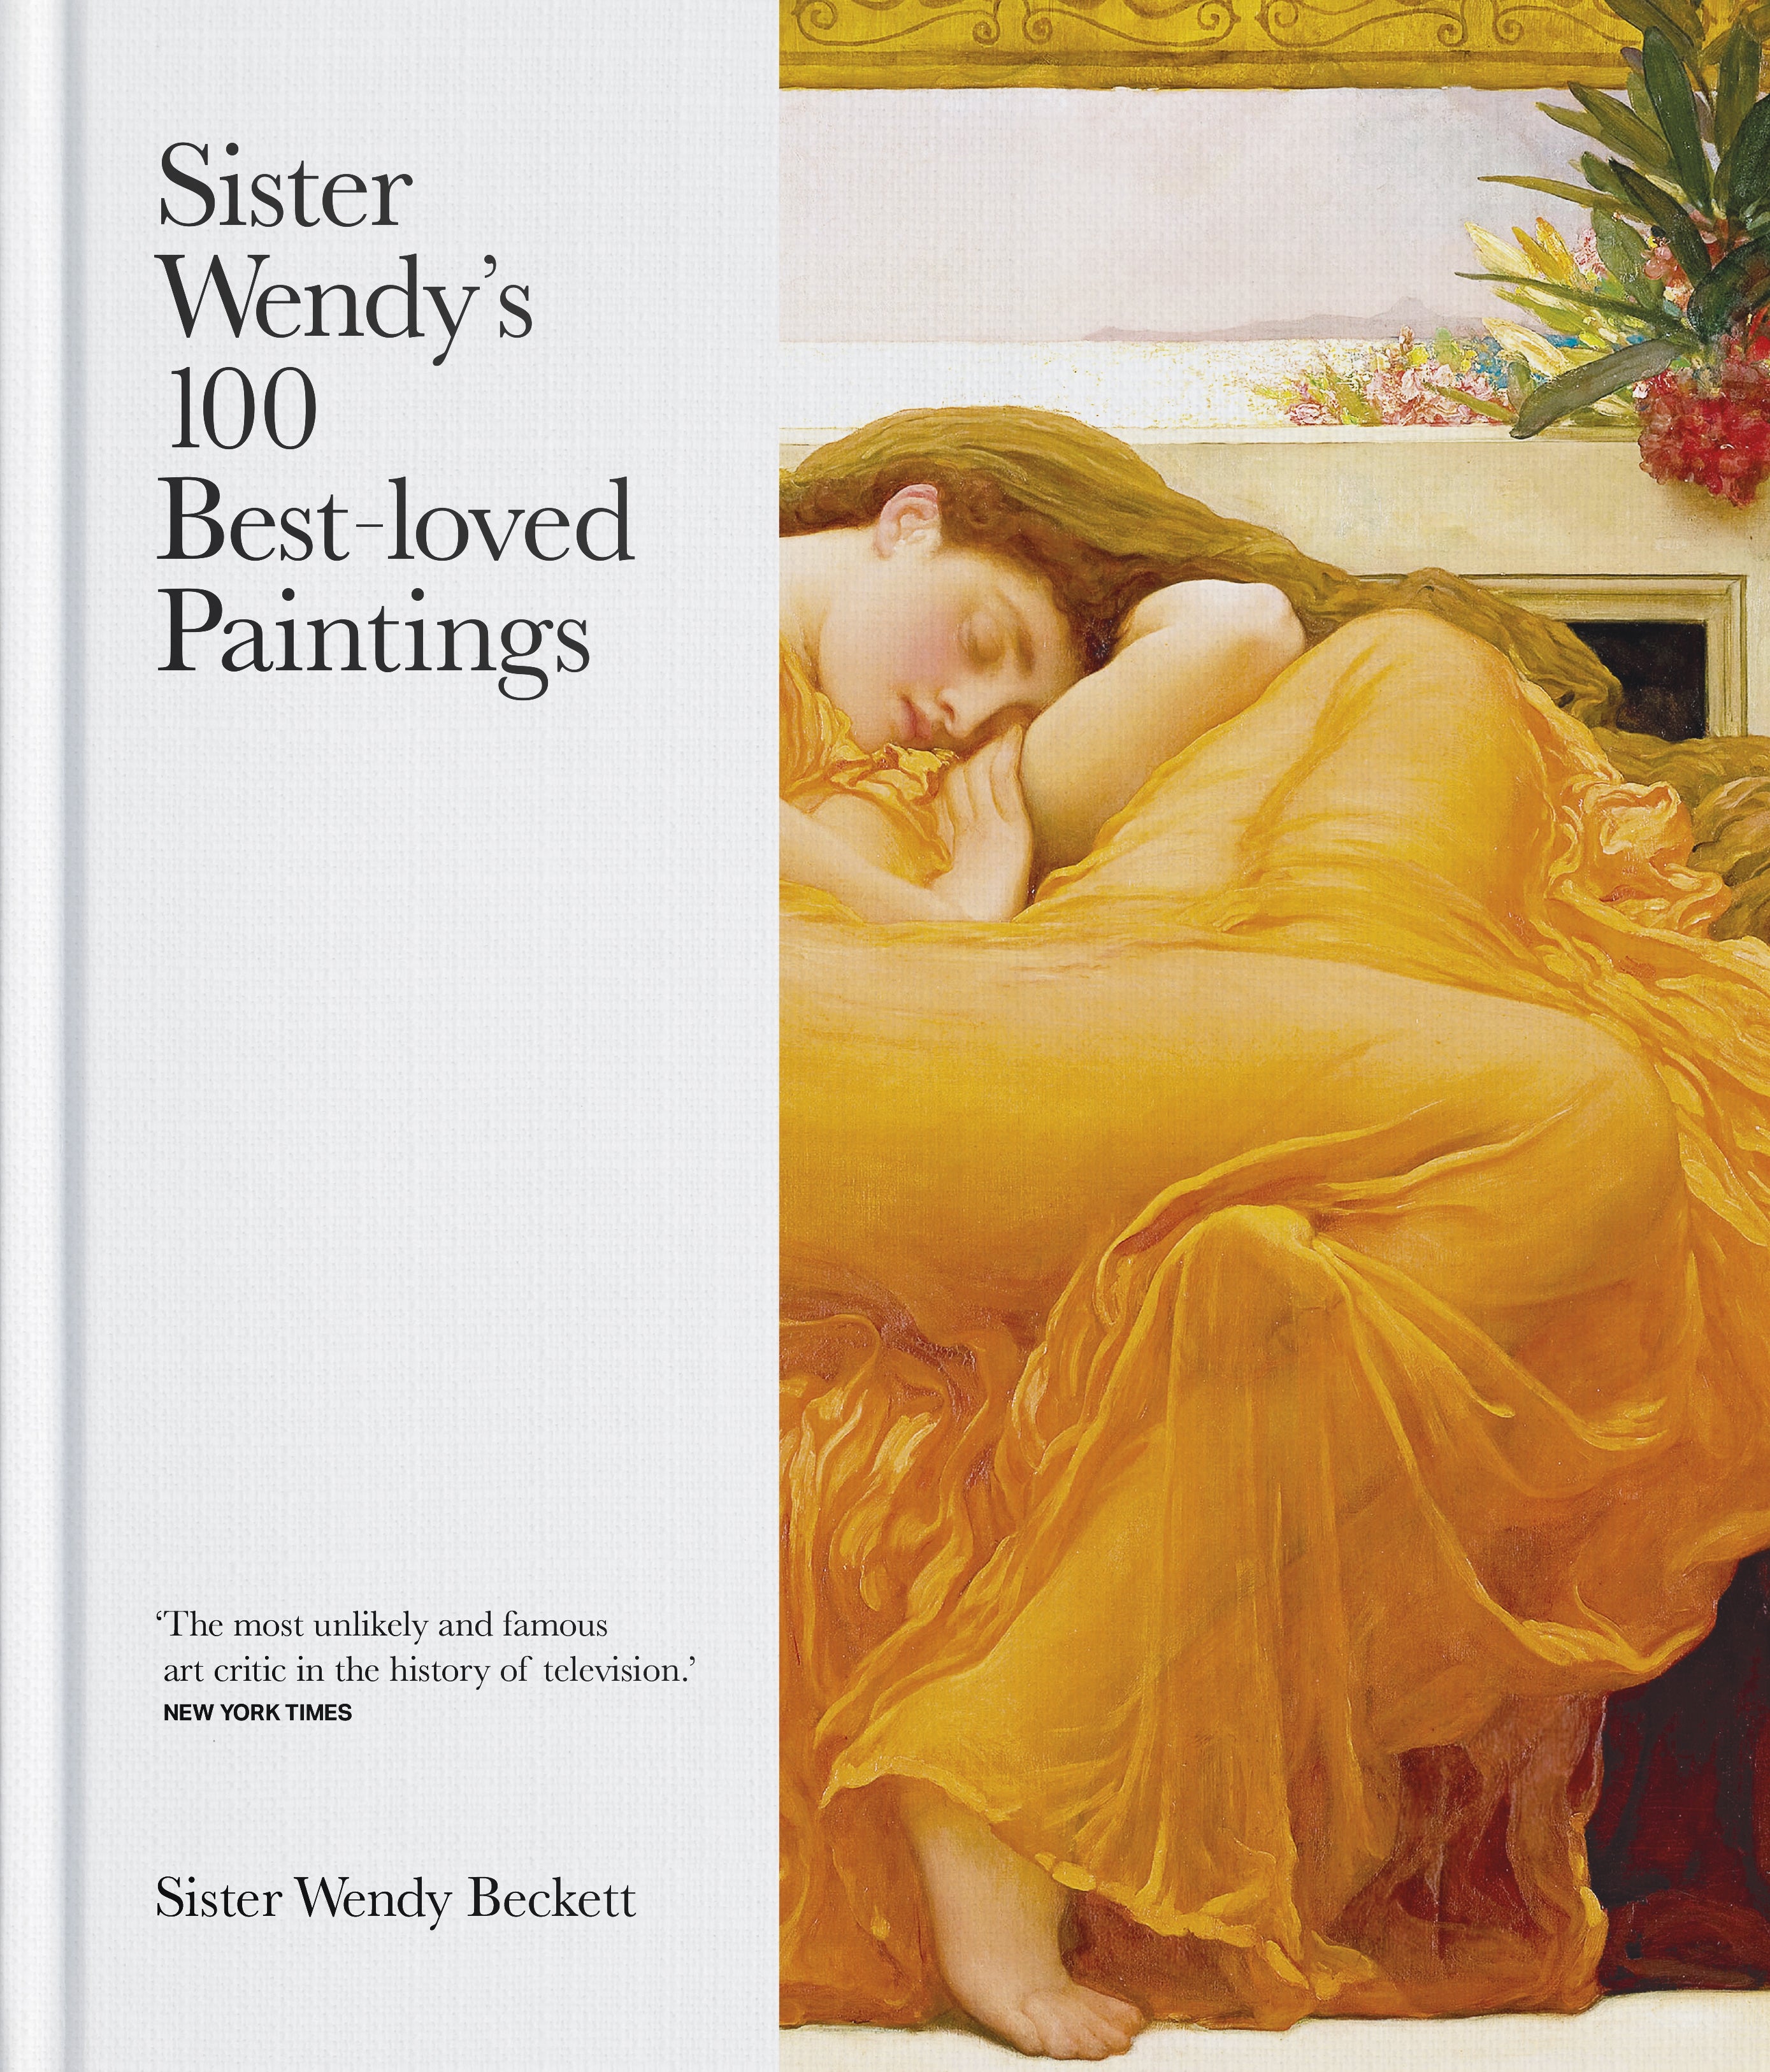 Image of Sister Wendy's 100 Best-loved Paintings other